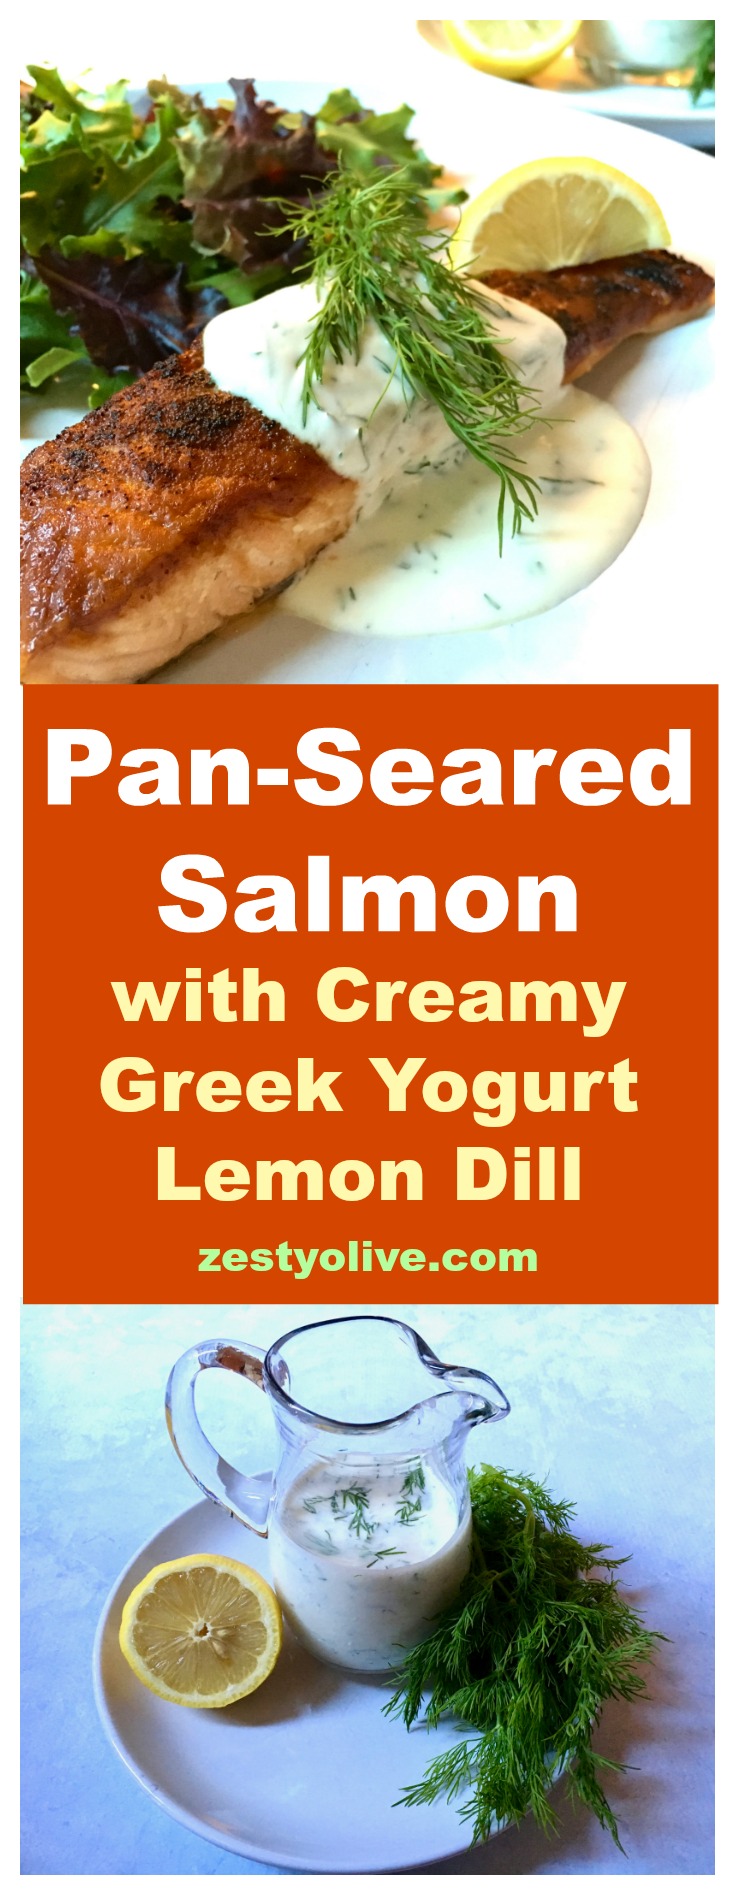 This zesty Pan-Seared Salmon with Creamy Greek Yogurt Lemon Dill Sauce is a quick and easy meal to prepare.